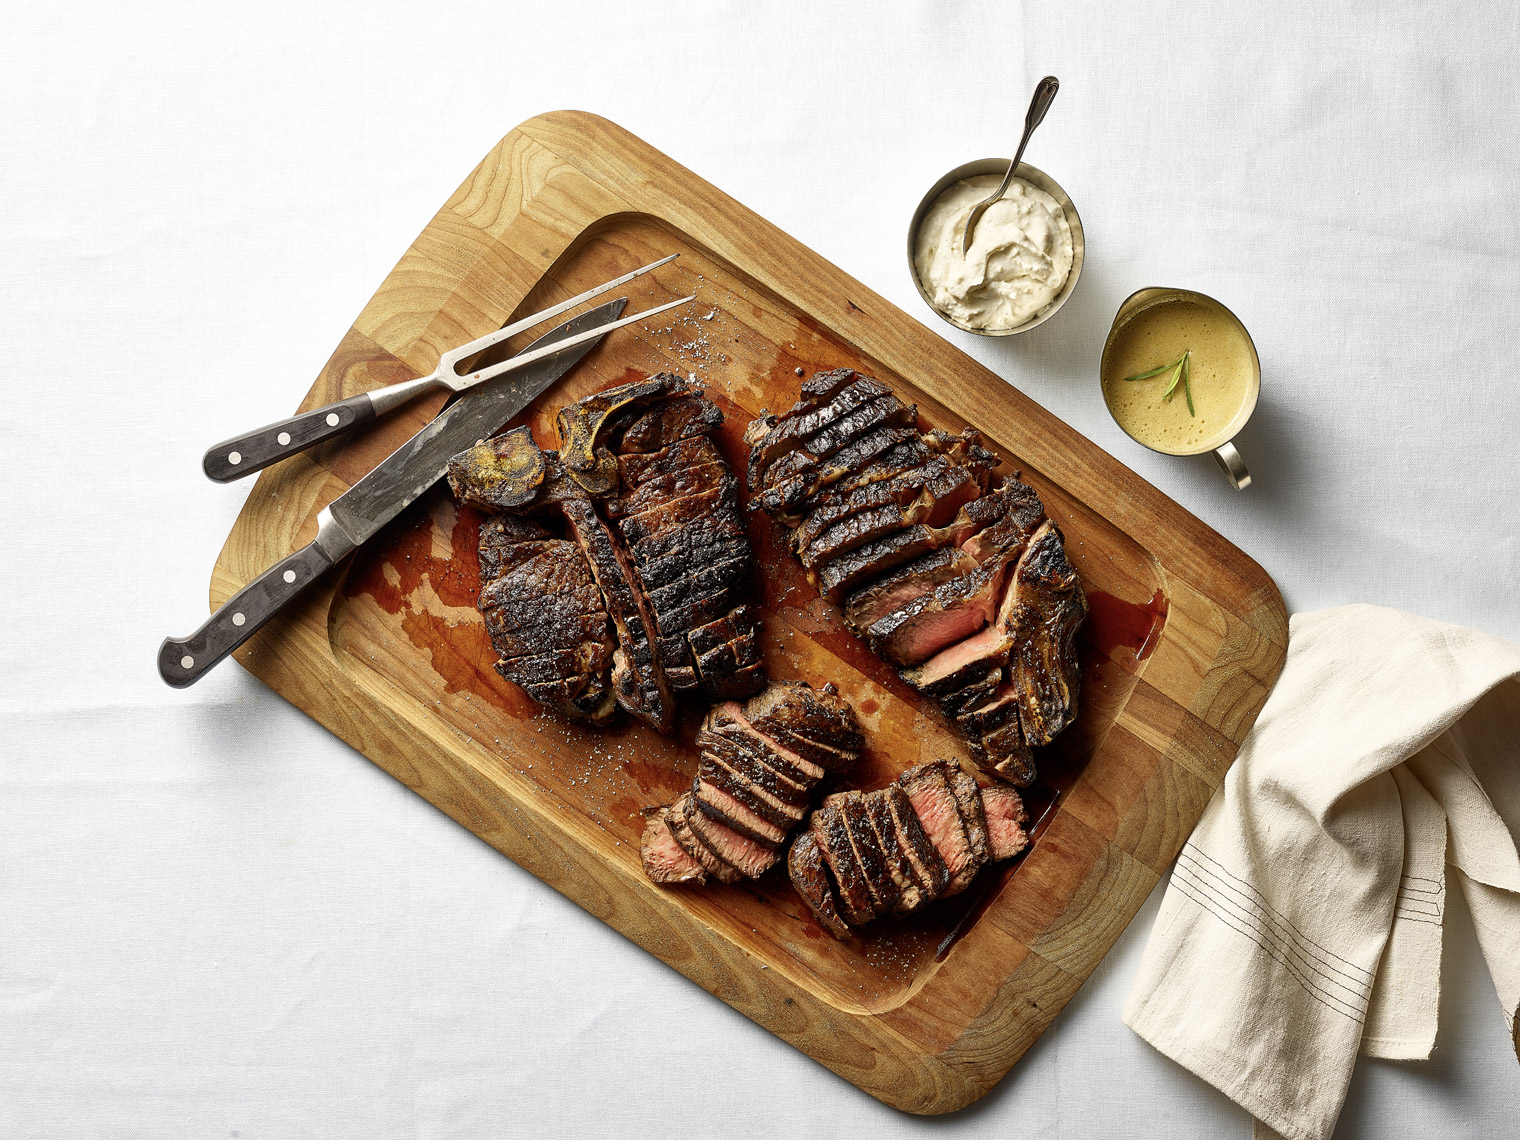 food stylist in Oakland - Dry Aged Steaks for Sunset Magazine photographed by Jeffrey Cross Photographer